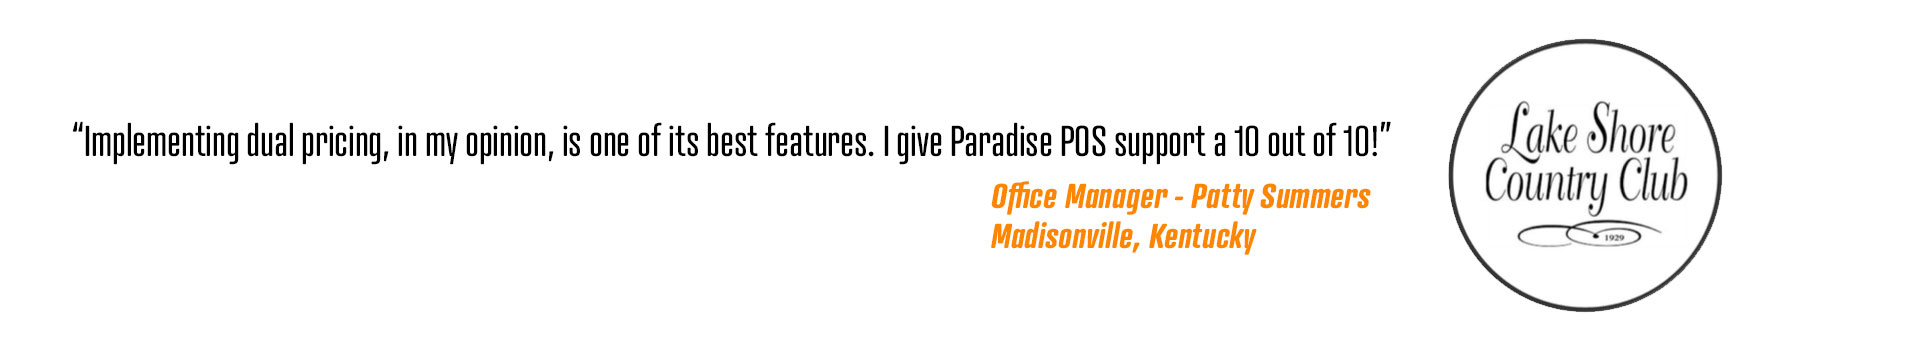 Implementing dual pricing, in my opinion, is one of its best features. I give Paradise POS support a 10 out of 10!